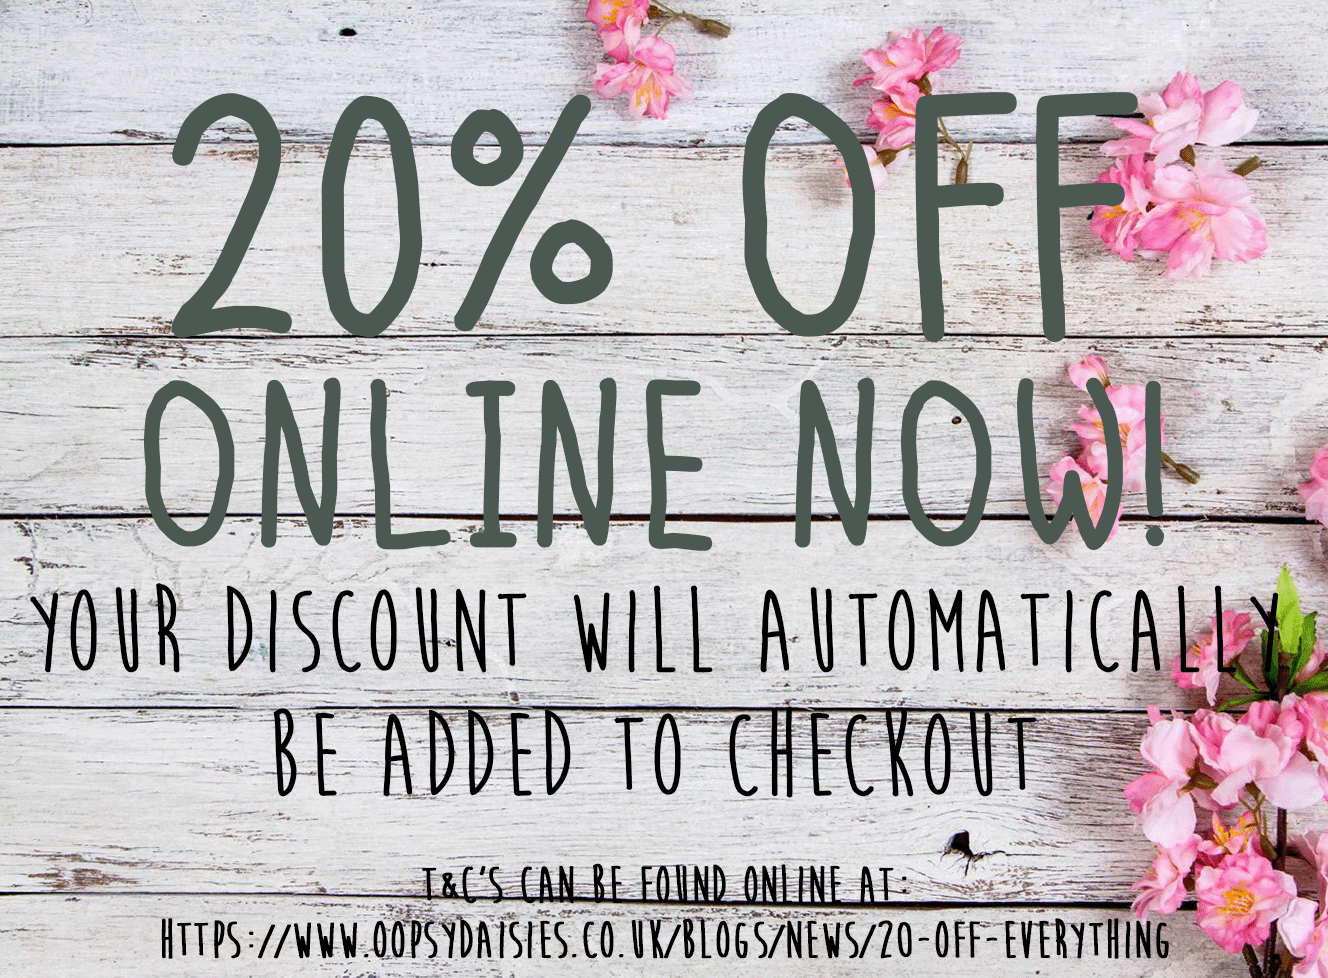 20% OFF EVERYTHING ONLINE!